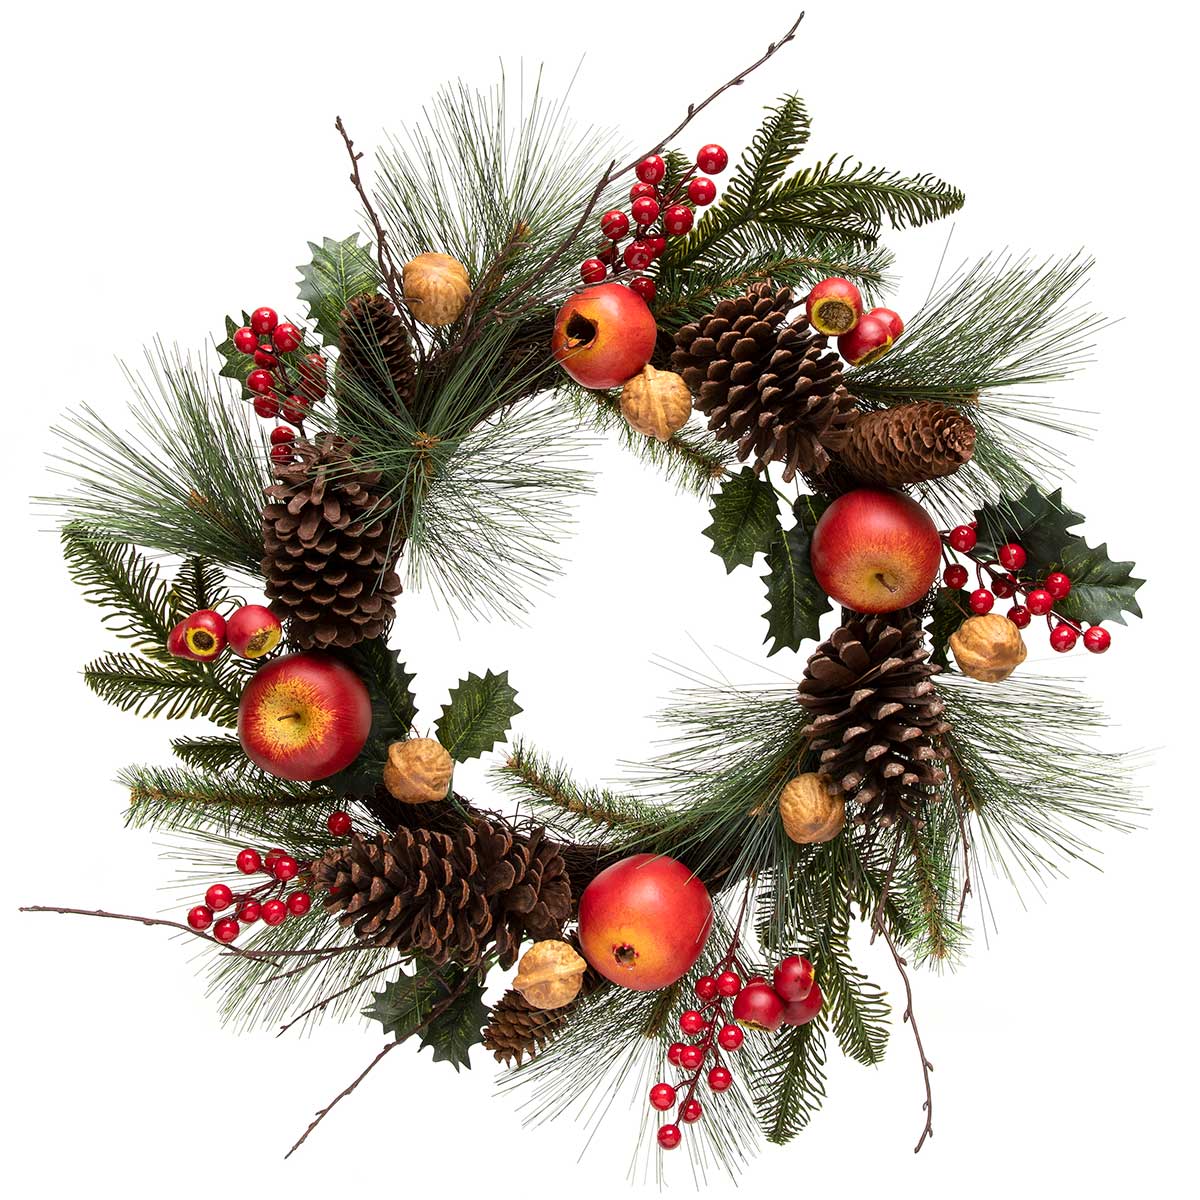 !POMEGRANATE AND PINE WREATH 24"